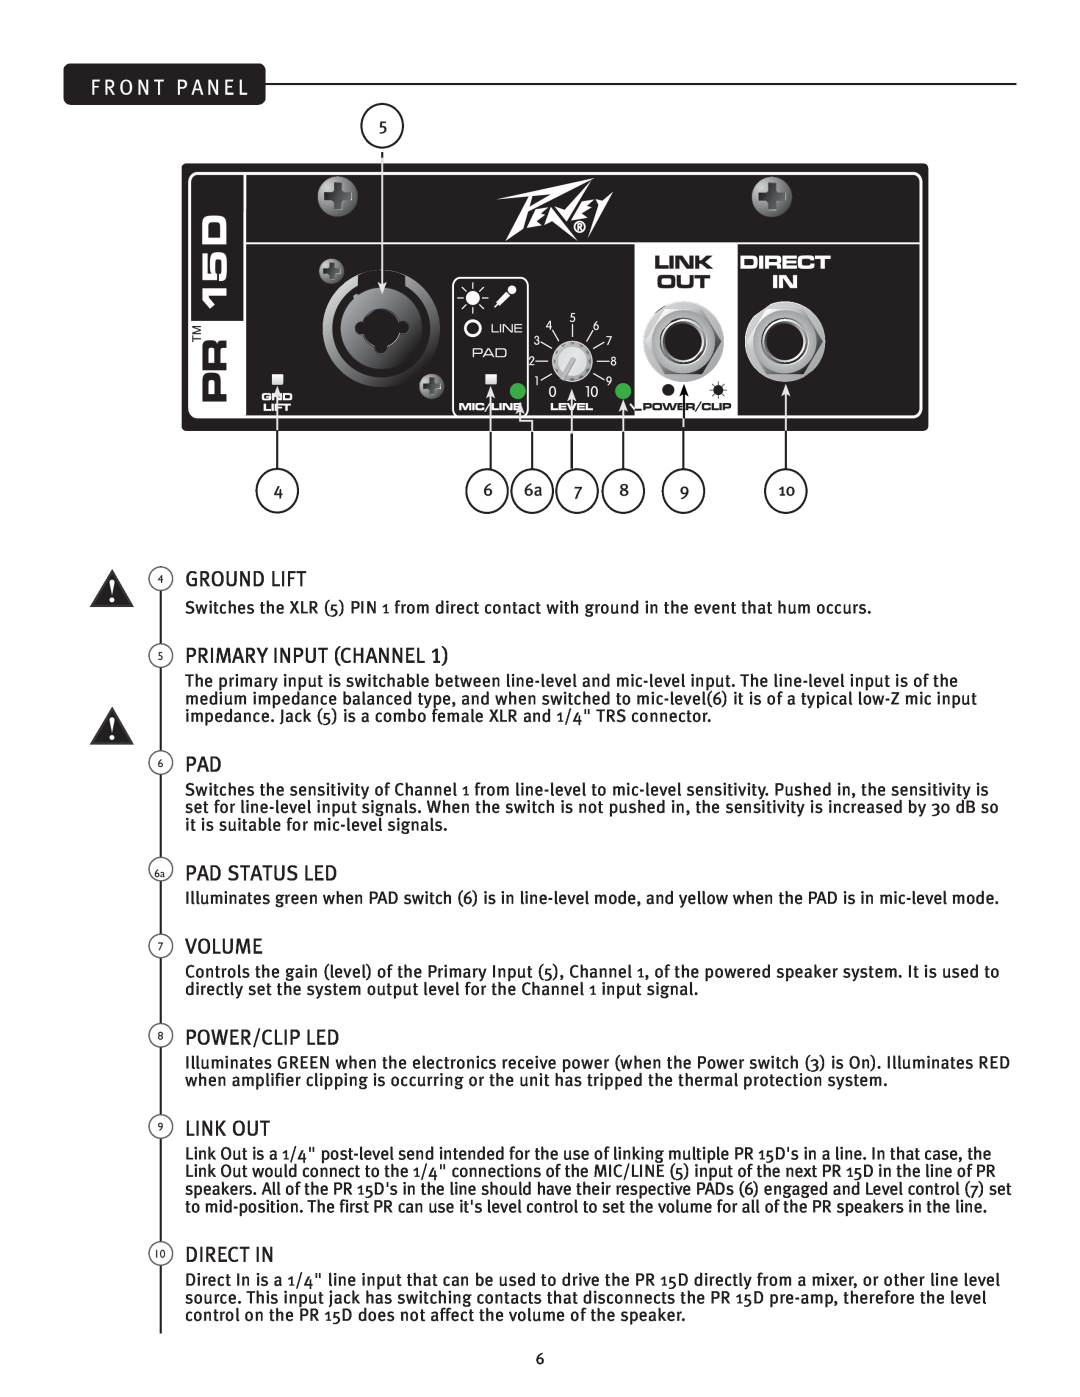 Peavey 15 D manual 4GROUND LIFT, 5PRIMARY INPUT CHANNEL, Pad Status Led, Volume, 8POWER/CLIP LED, 9LINK OUT, 10DIRECT IN 